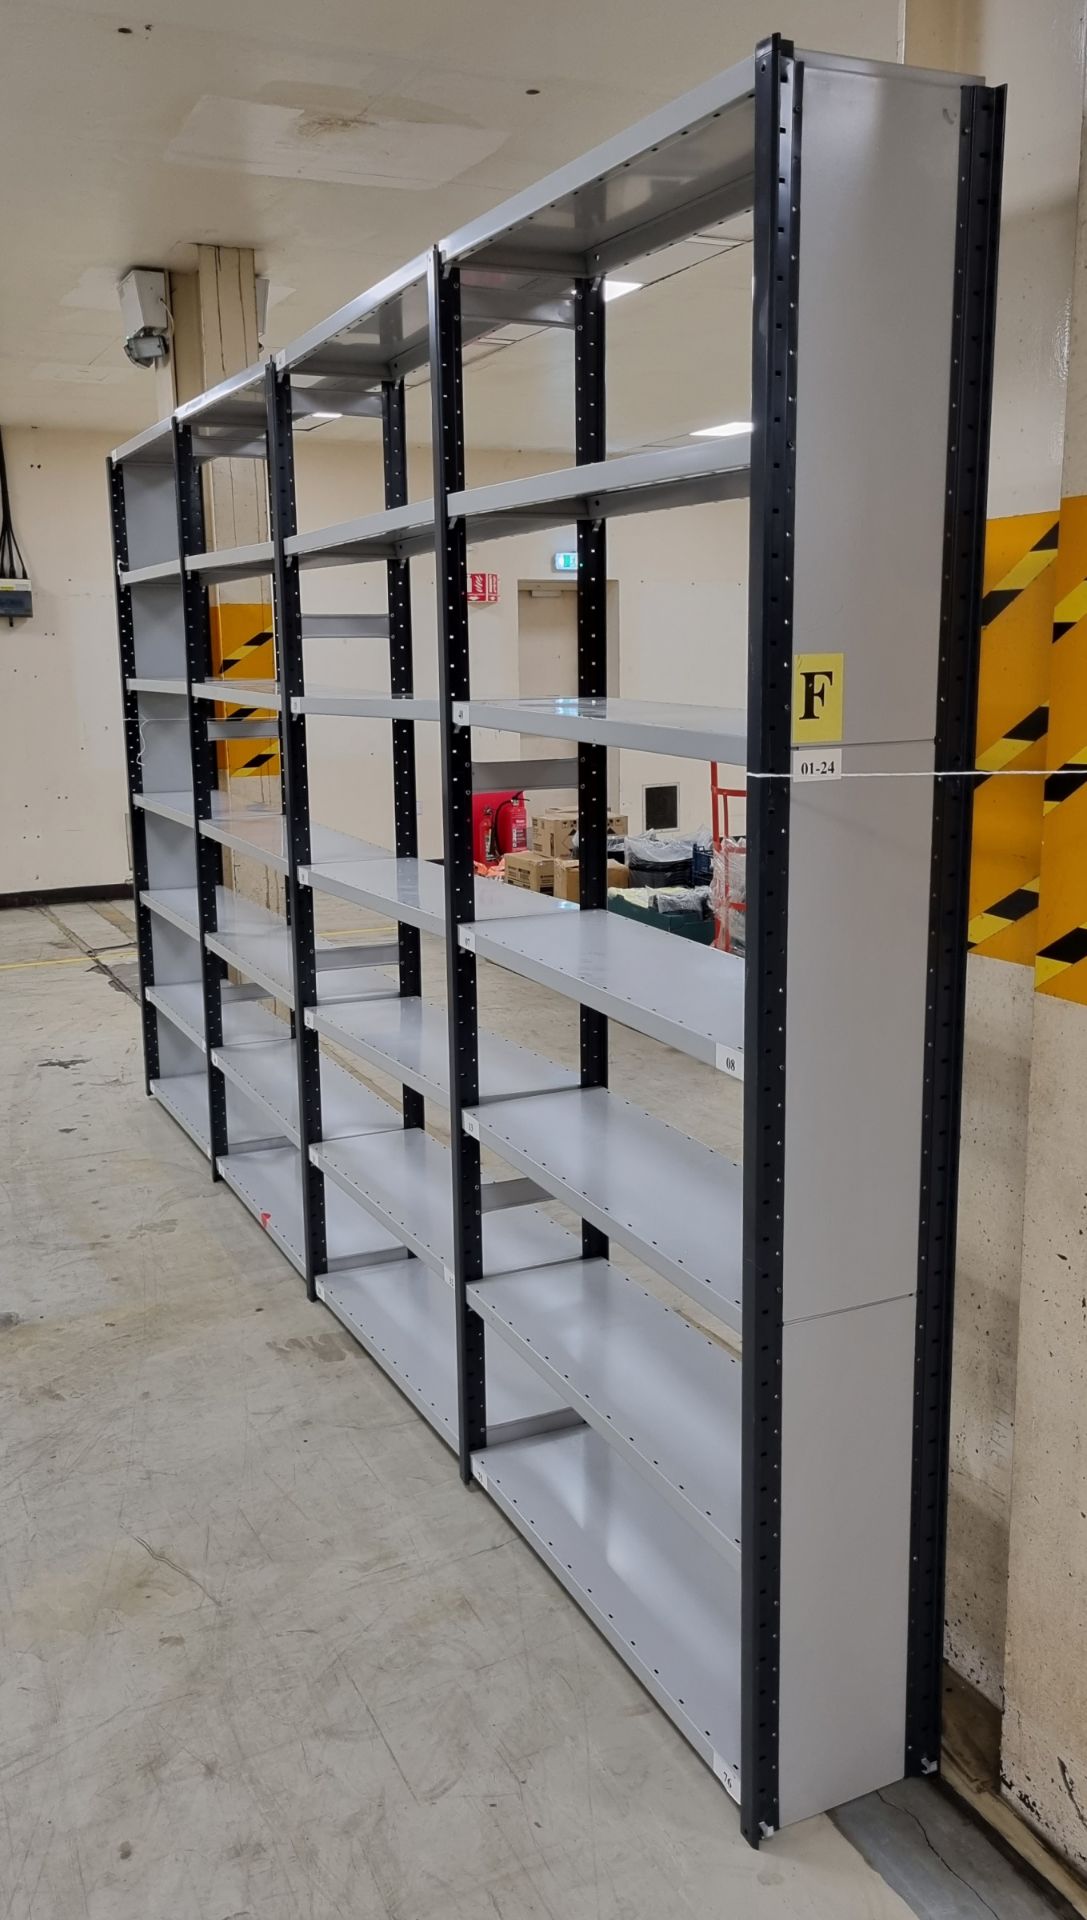 2x sets of Industrial 4 bay shelving assemblies - see description for details - Image 3 of 6